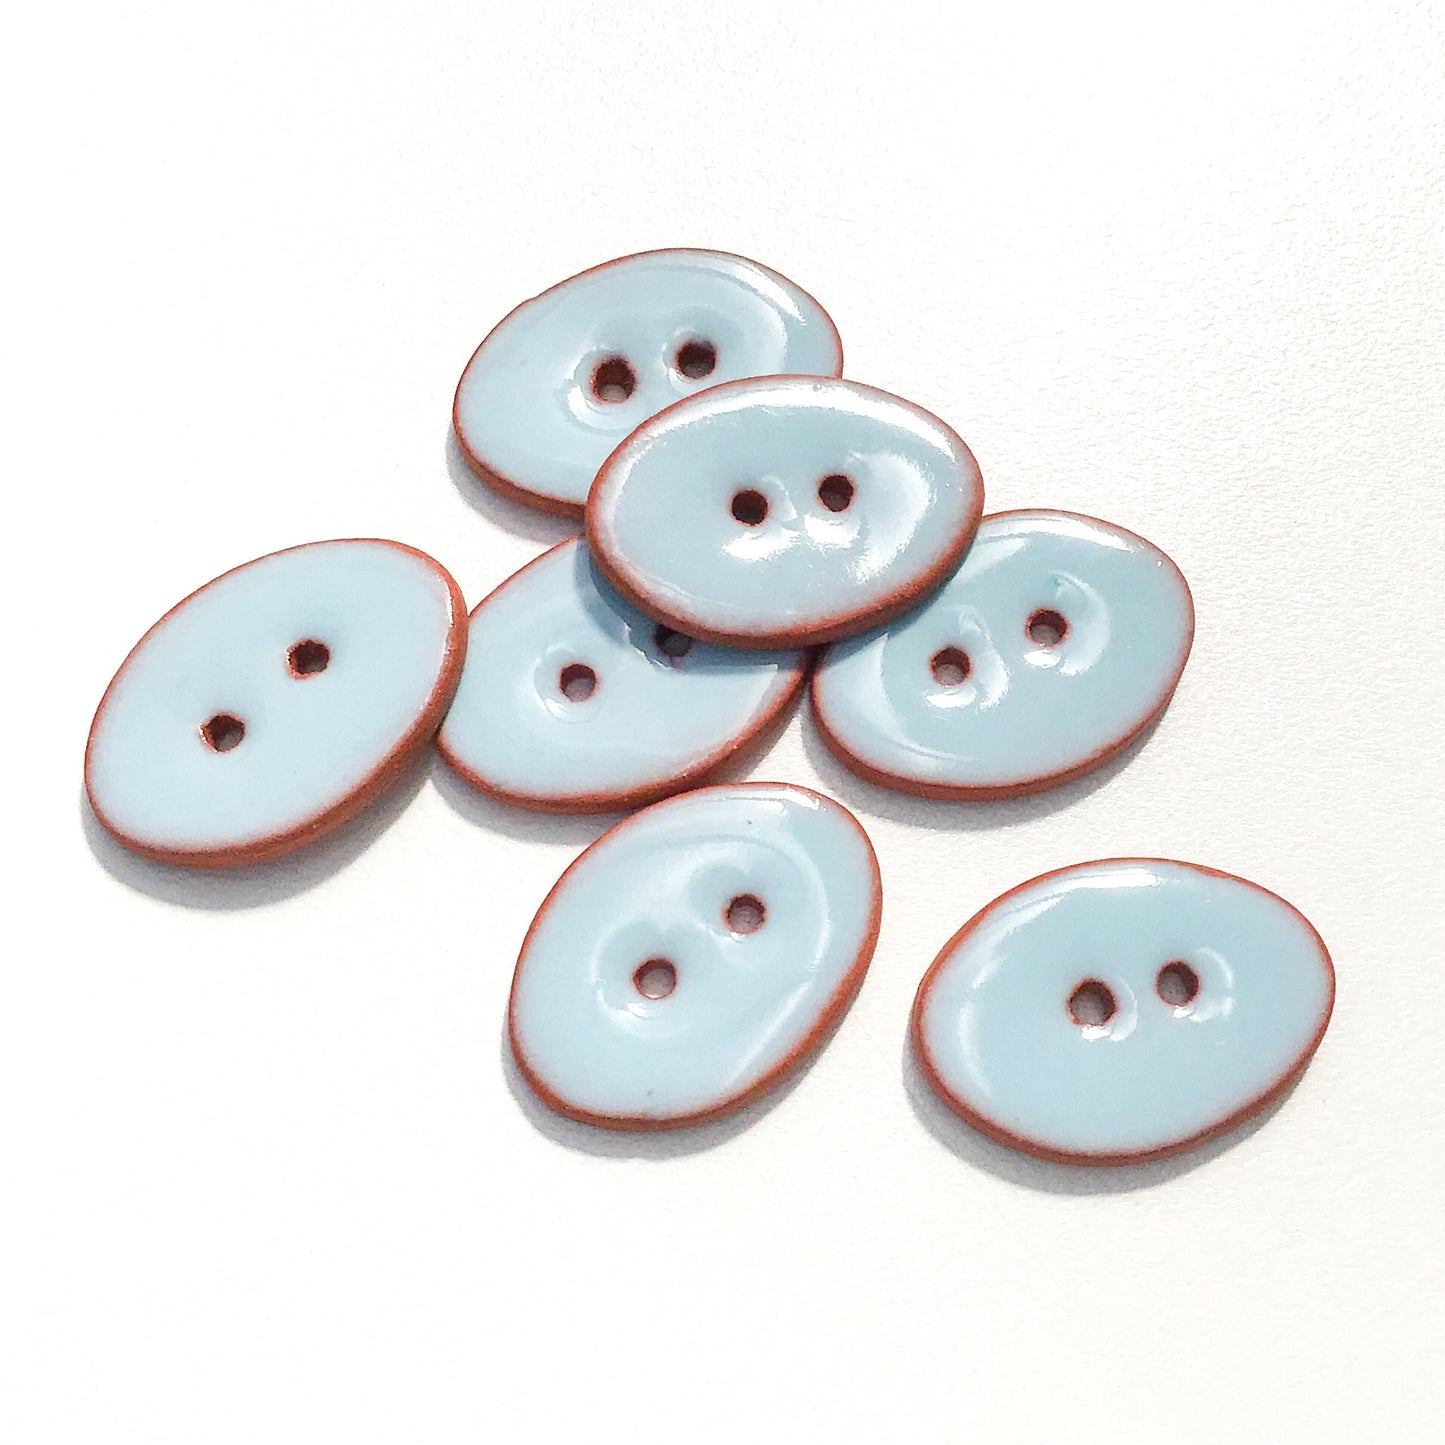 Sky Blue Oval Clay Buttons - 5/8" x 7/8" - 7 Pack (ws-193)